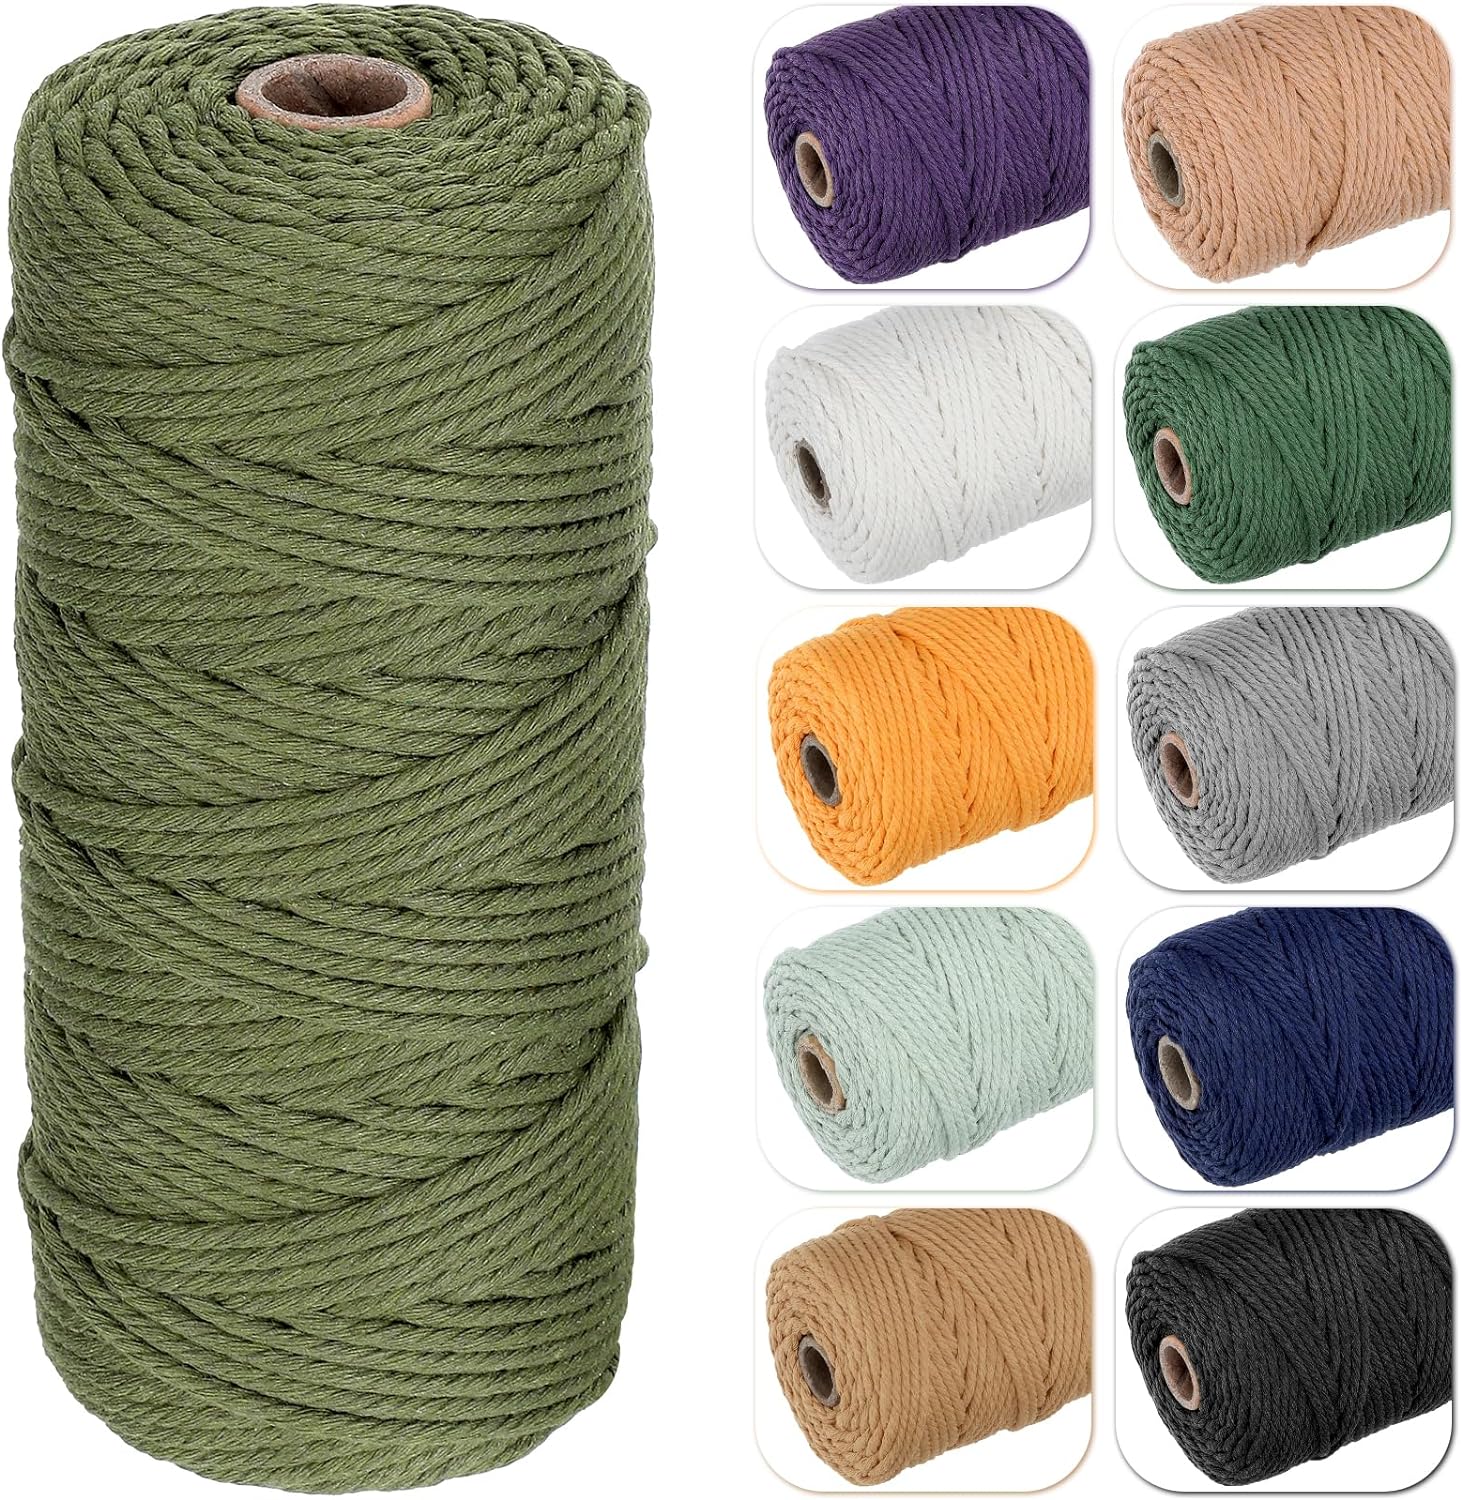 Blisstime Macrame Cord 3mm X 109 Yards Natural Cotton Macrame Rope 4 Strand Twisted Cotton Cord Undyed Cotton Rope for Wall Hangings, Plant Hangers, Crafts, Knitting, Decorative Projects (Olive Green)